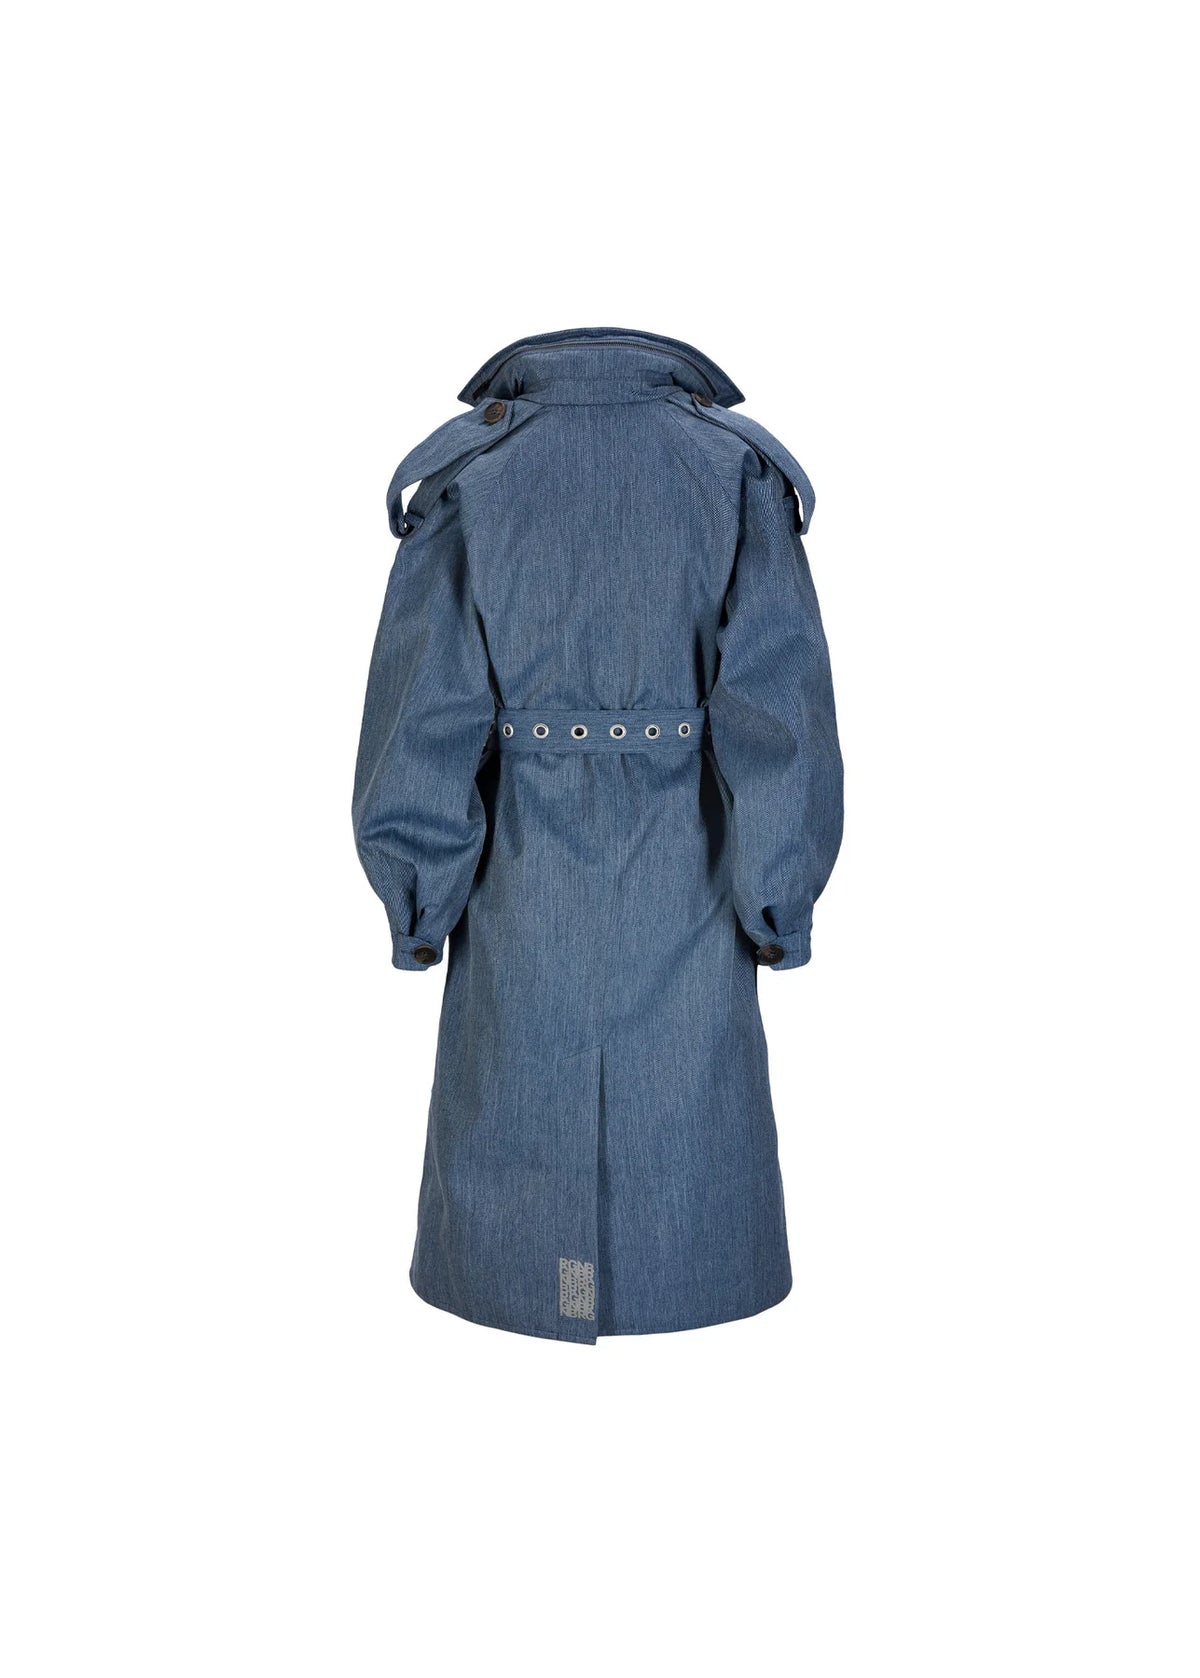 Denim blue waterproof trench coat with removable hood